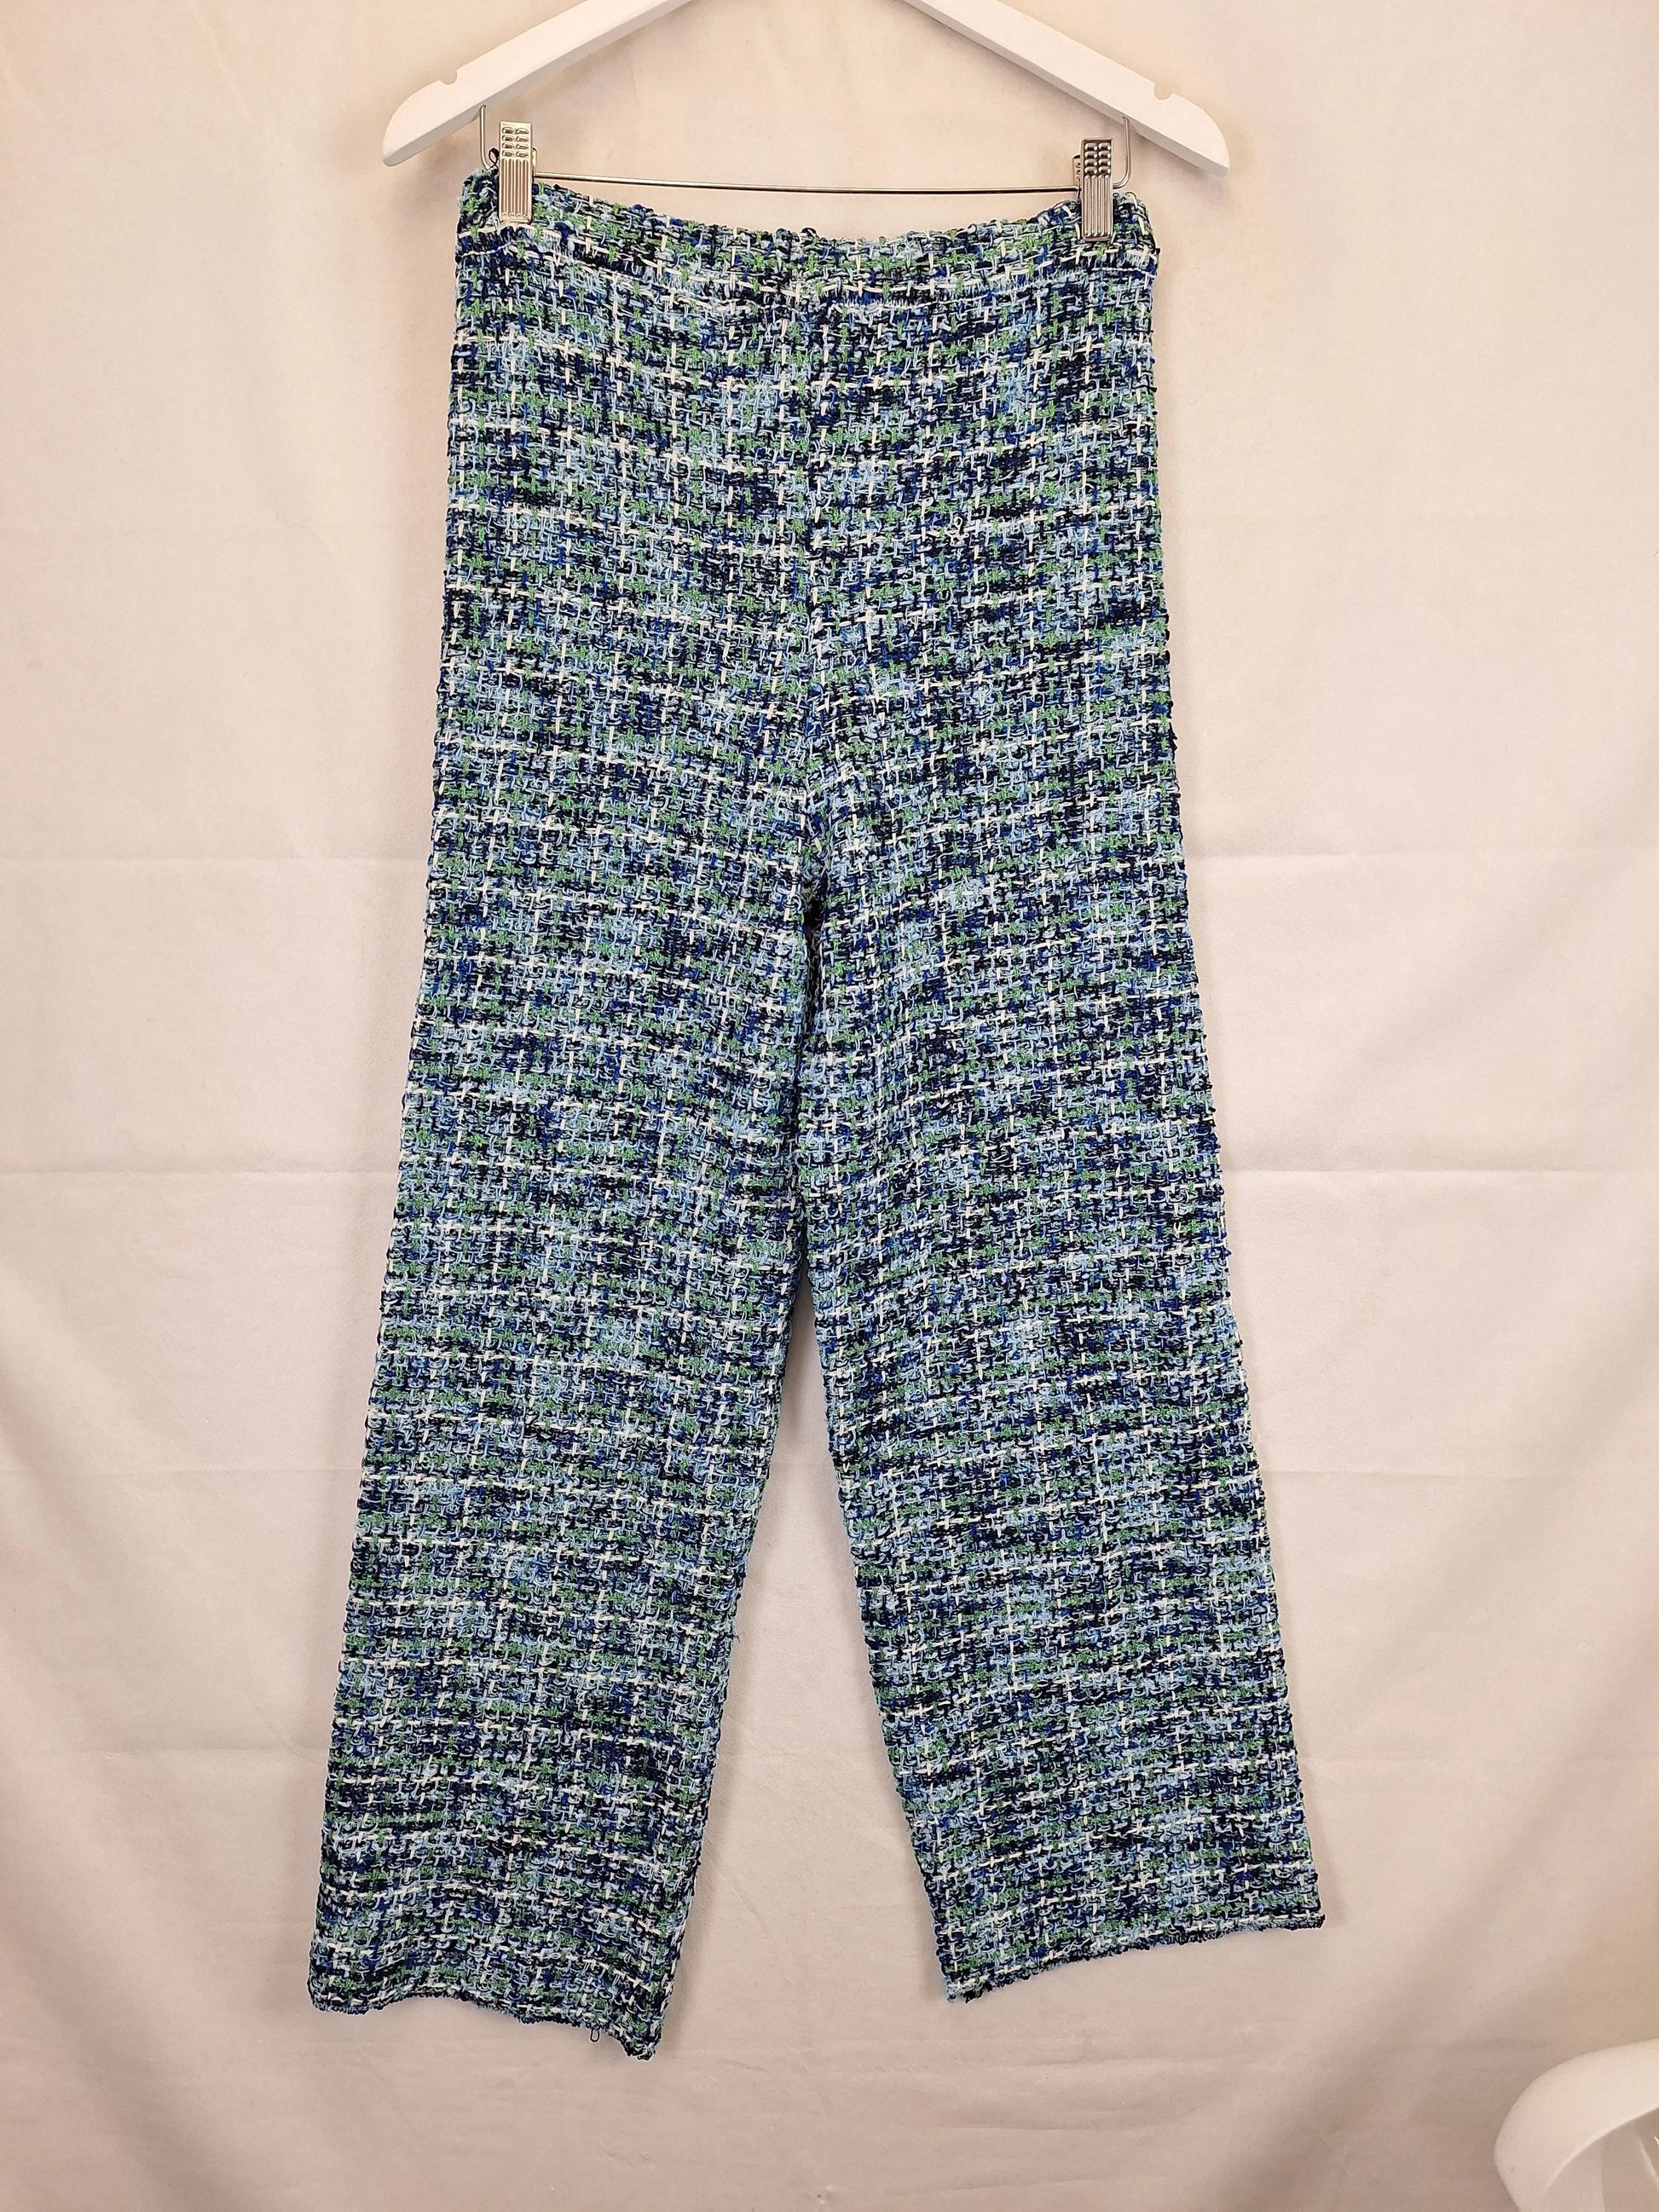 Zara Stylish Textured Knit Pants Size M by SwapUp-Online Second Hand Store-Online Thrift Store